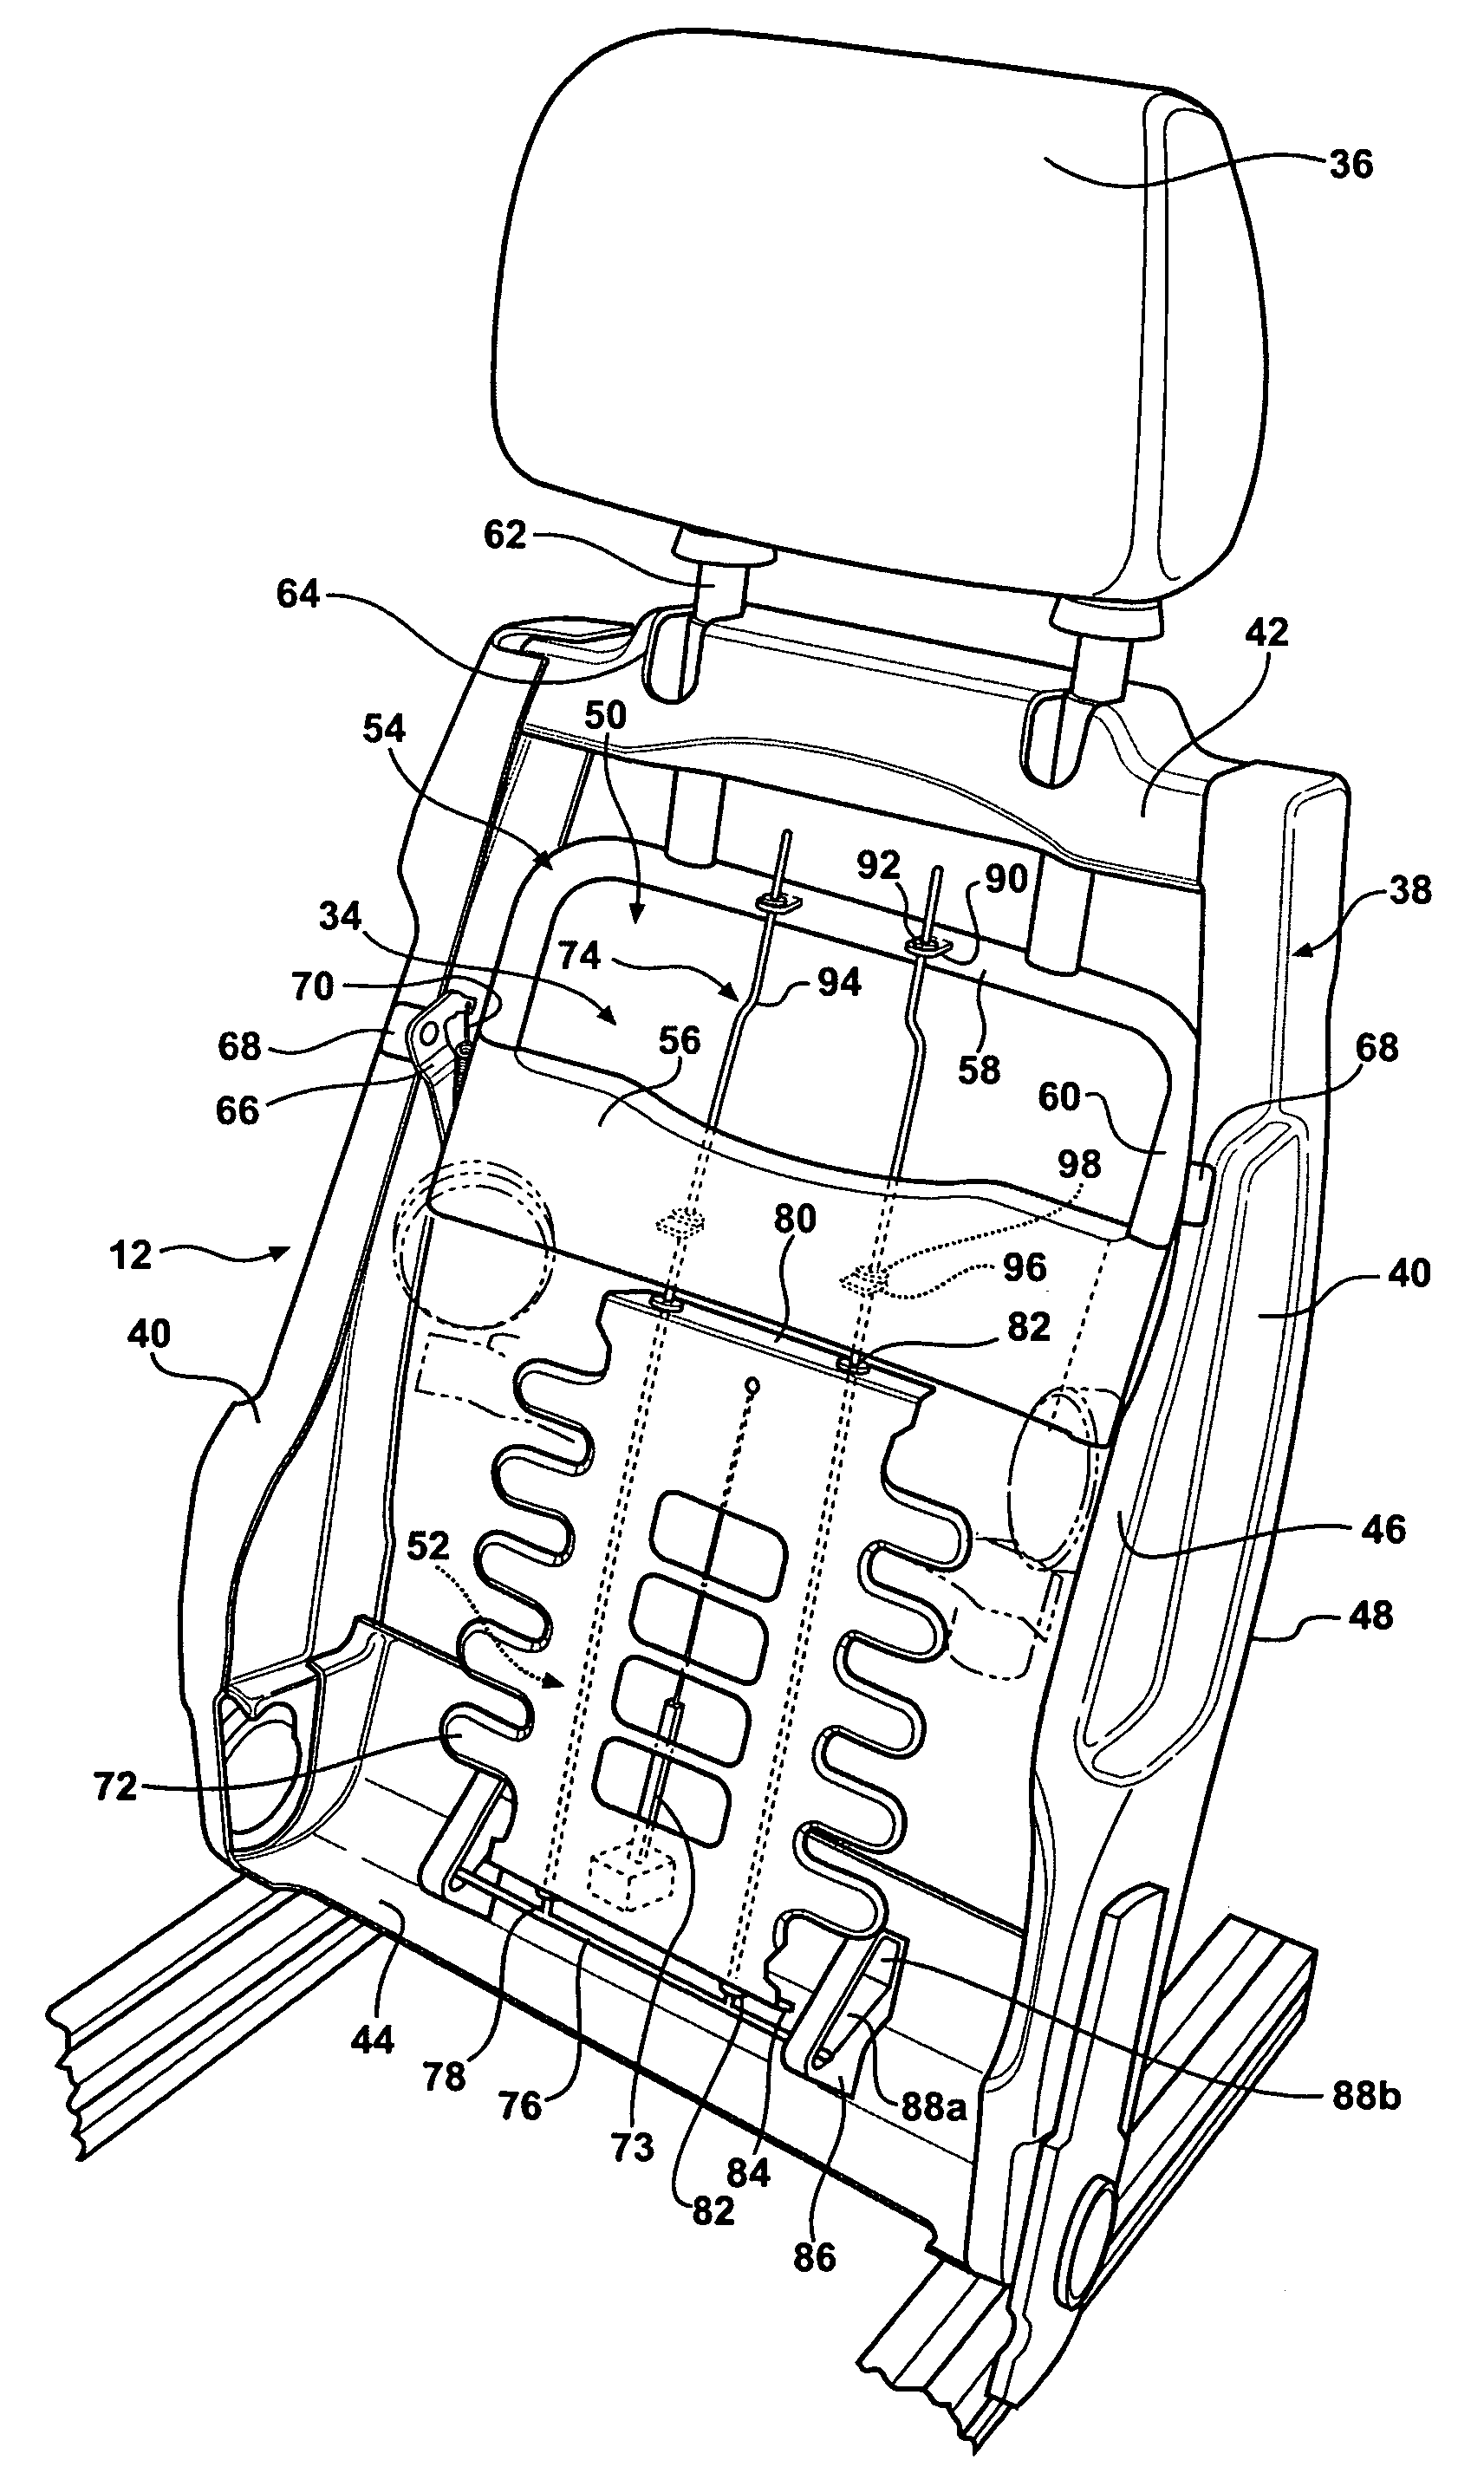 Vehicle seat assembly having active head restraint system